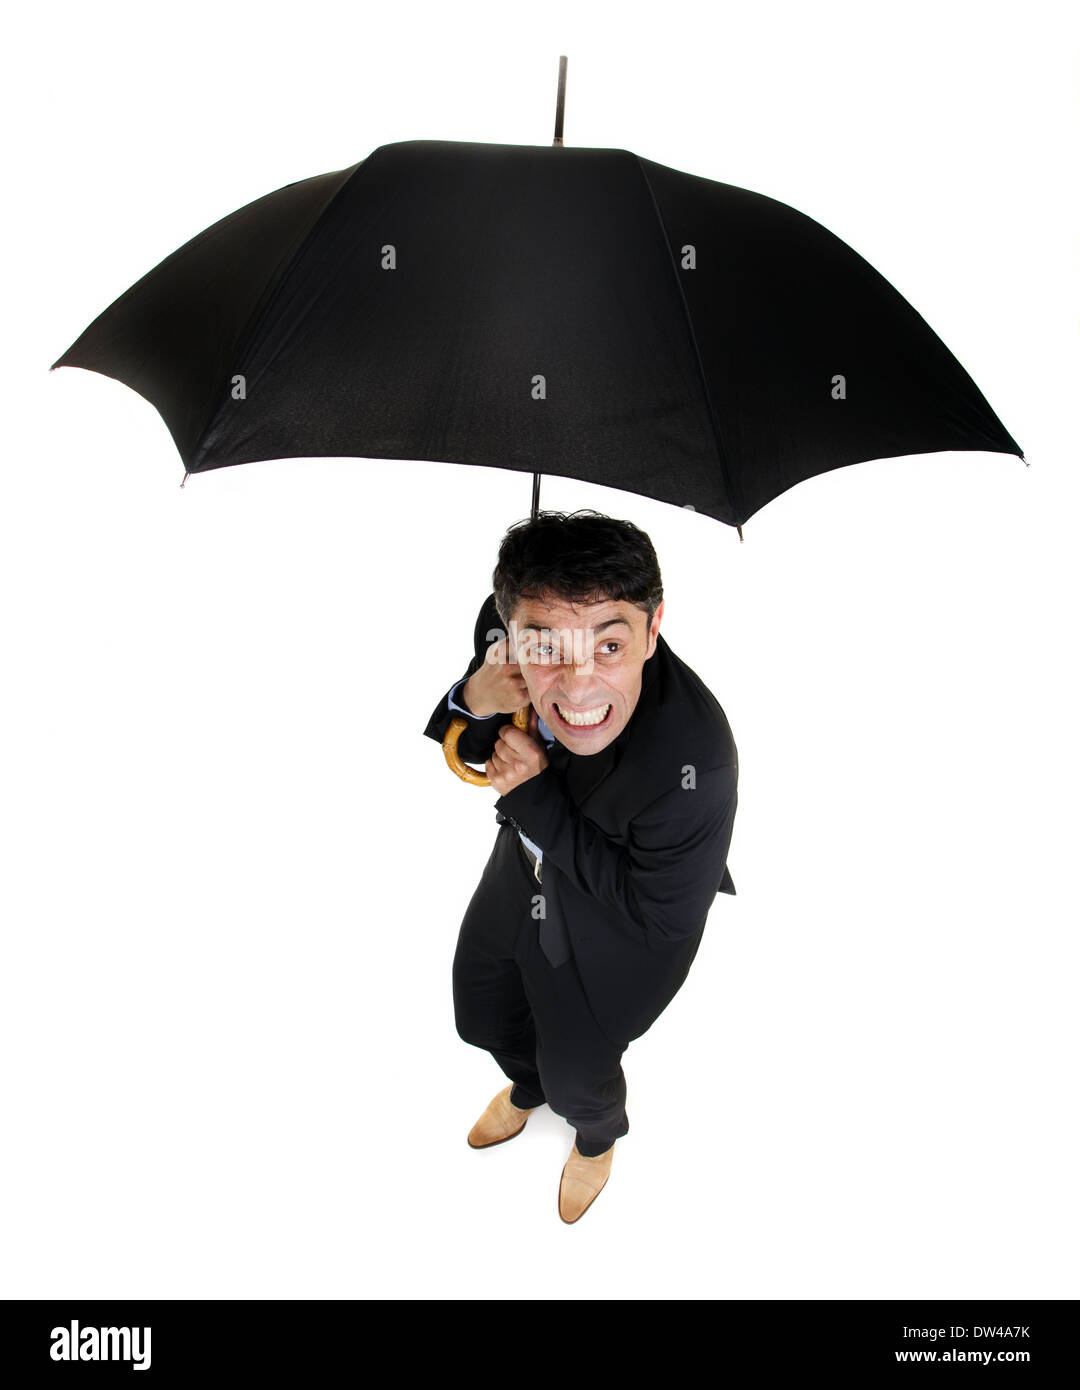 Humorous high angle full length portrait of a squeamish business cowering under an umbrella as he looks up at the inclement rain Stock Photo